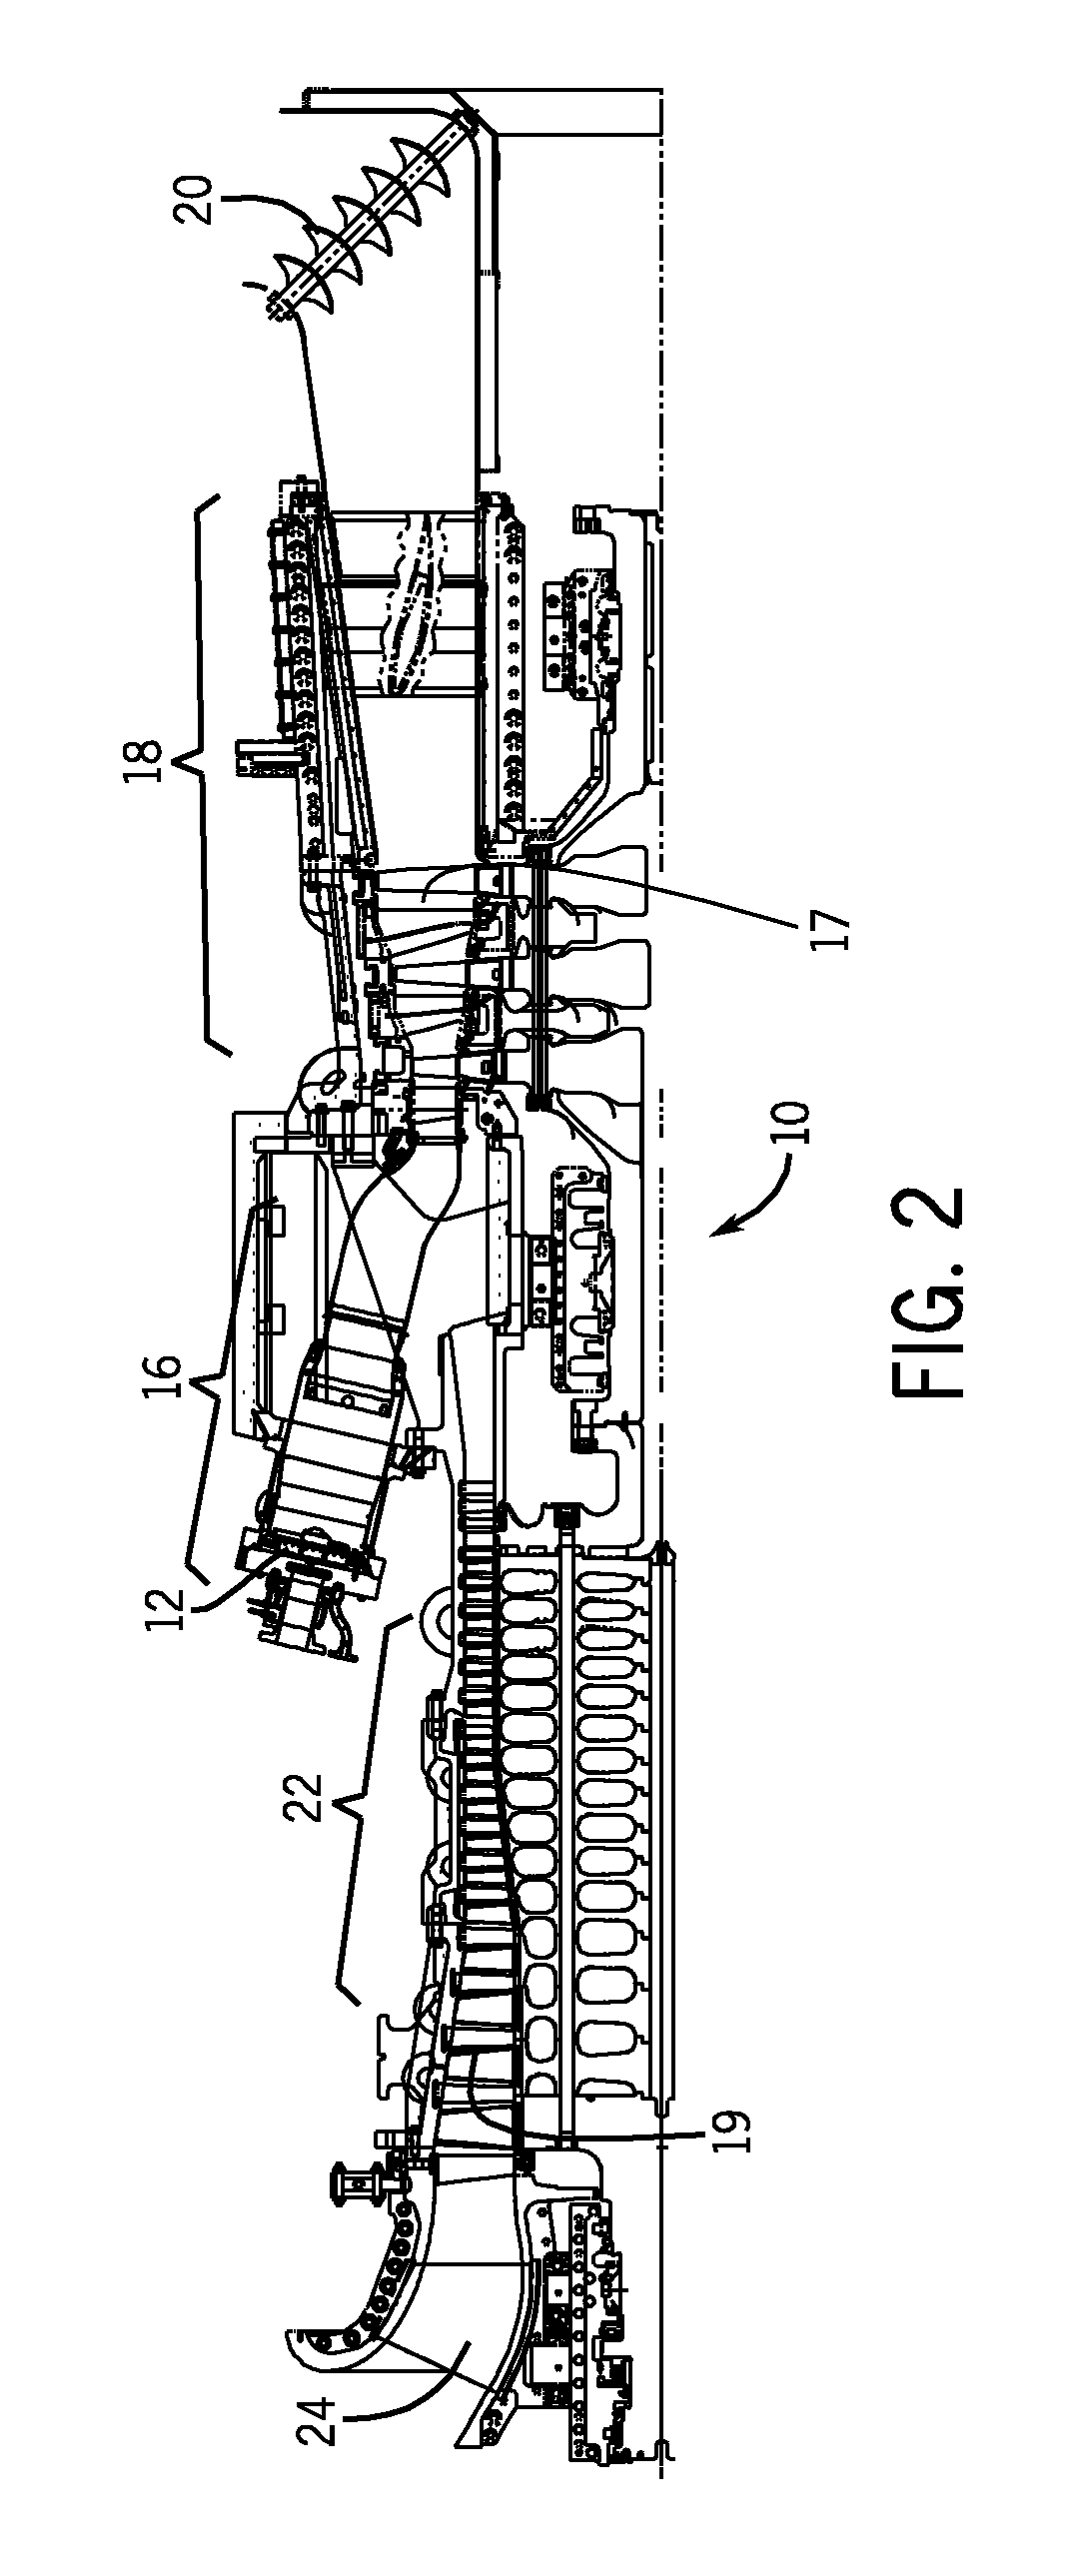 Method and apparatus for fuel injection in a turbine engine